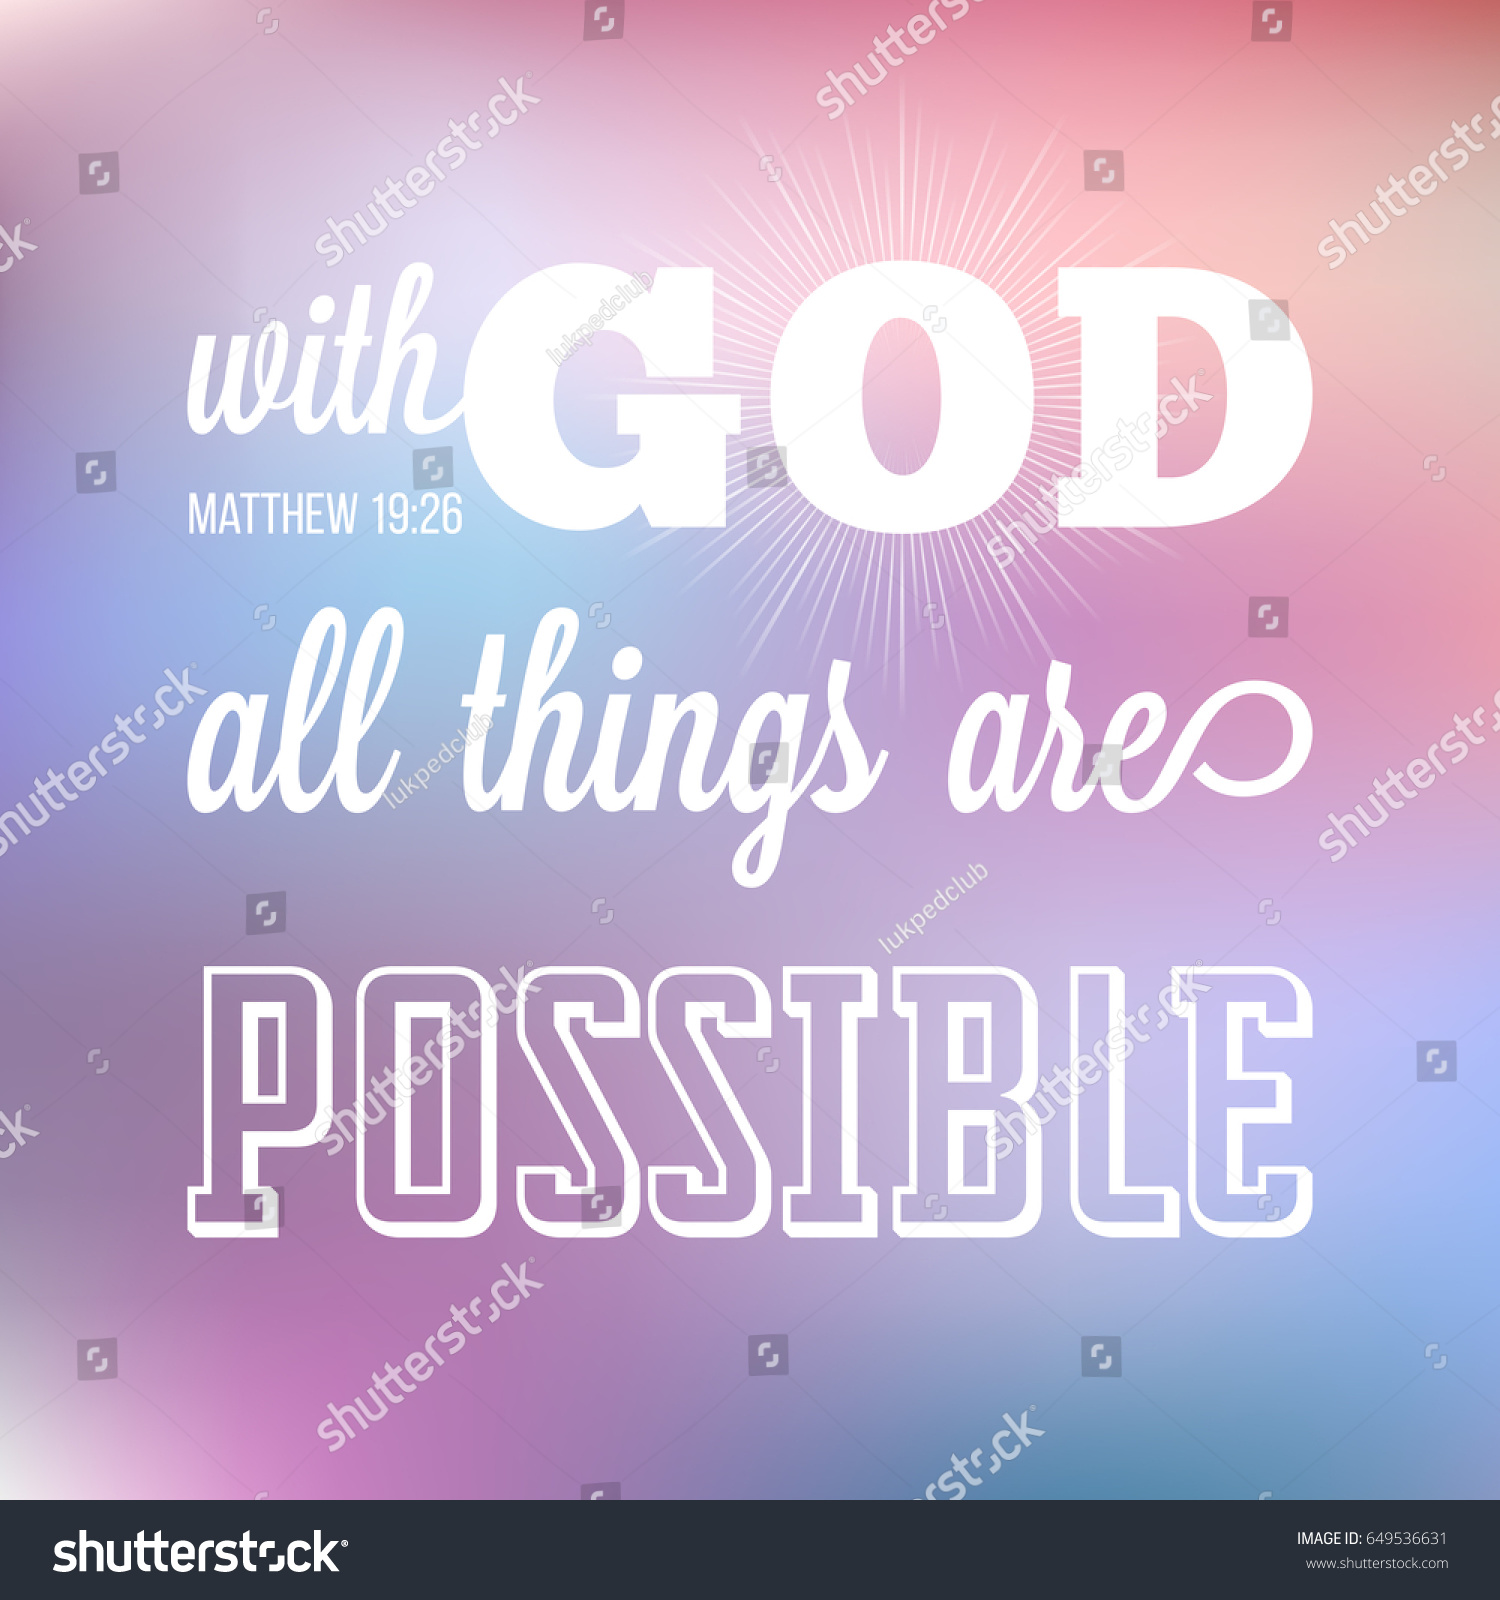 SVG of with god all things are possible, verse from bible in calligraphic for use as background, poster or design t shirt svg